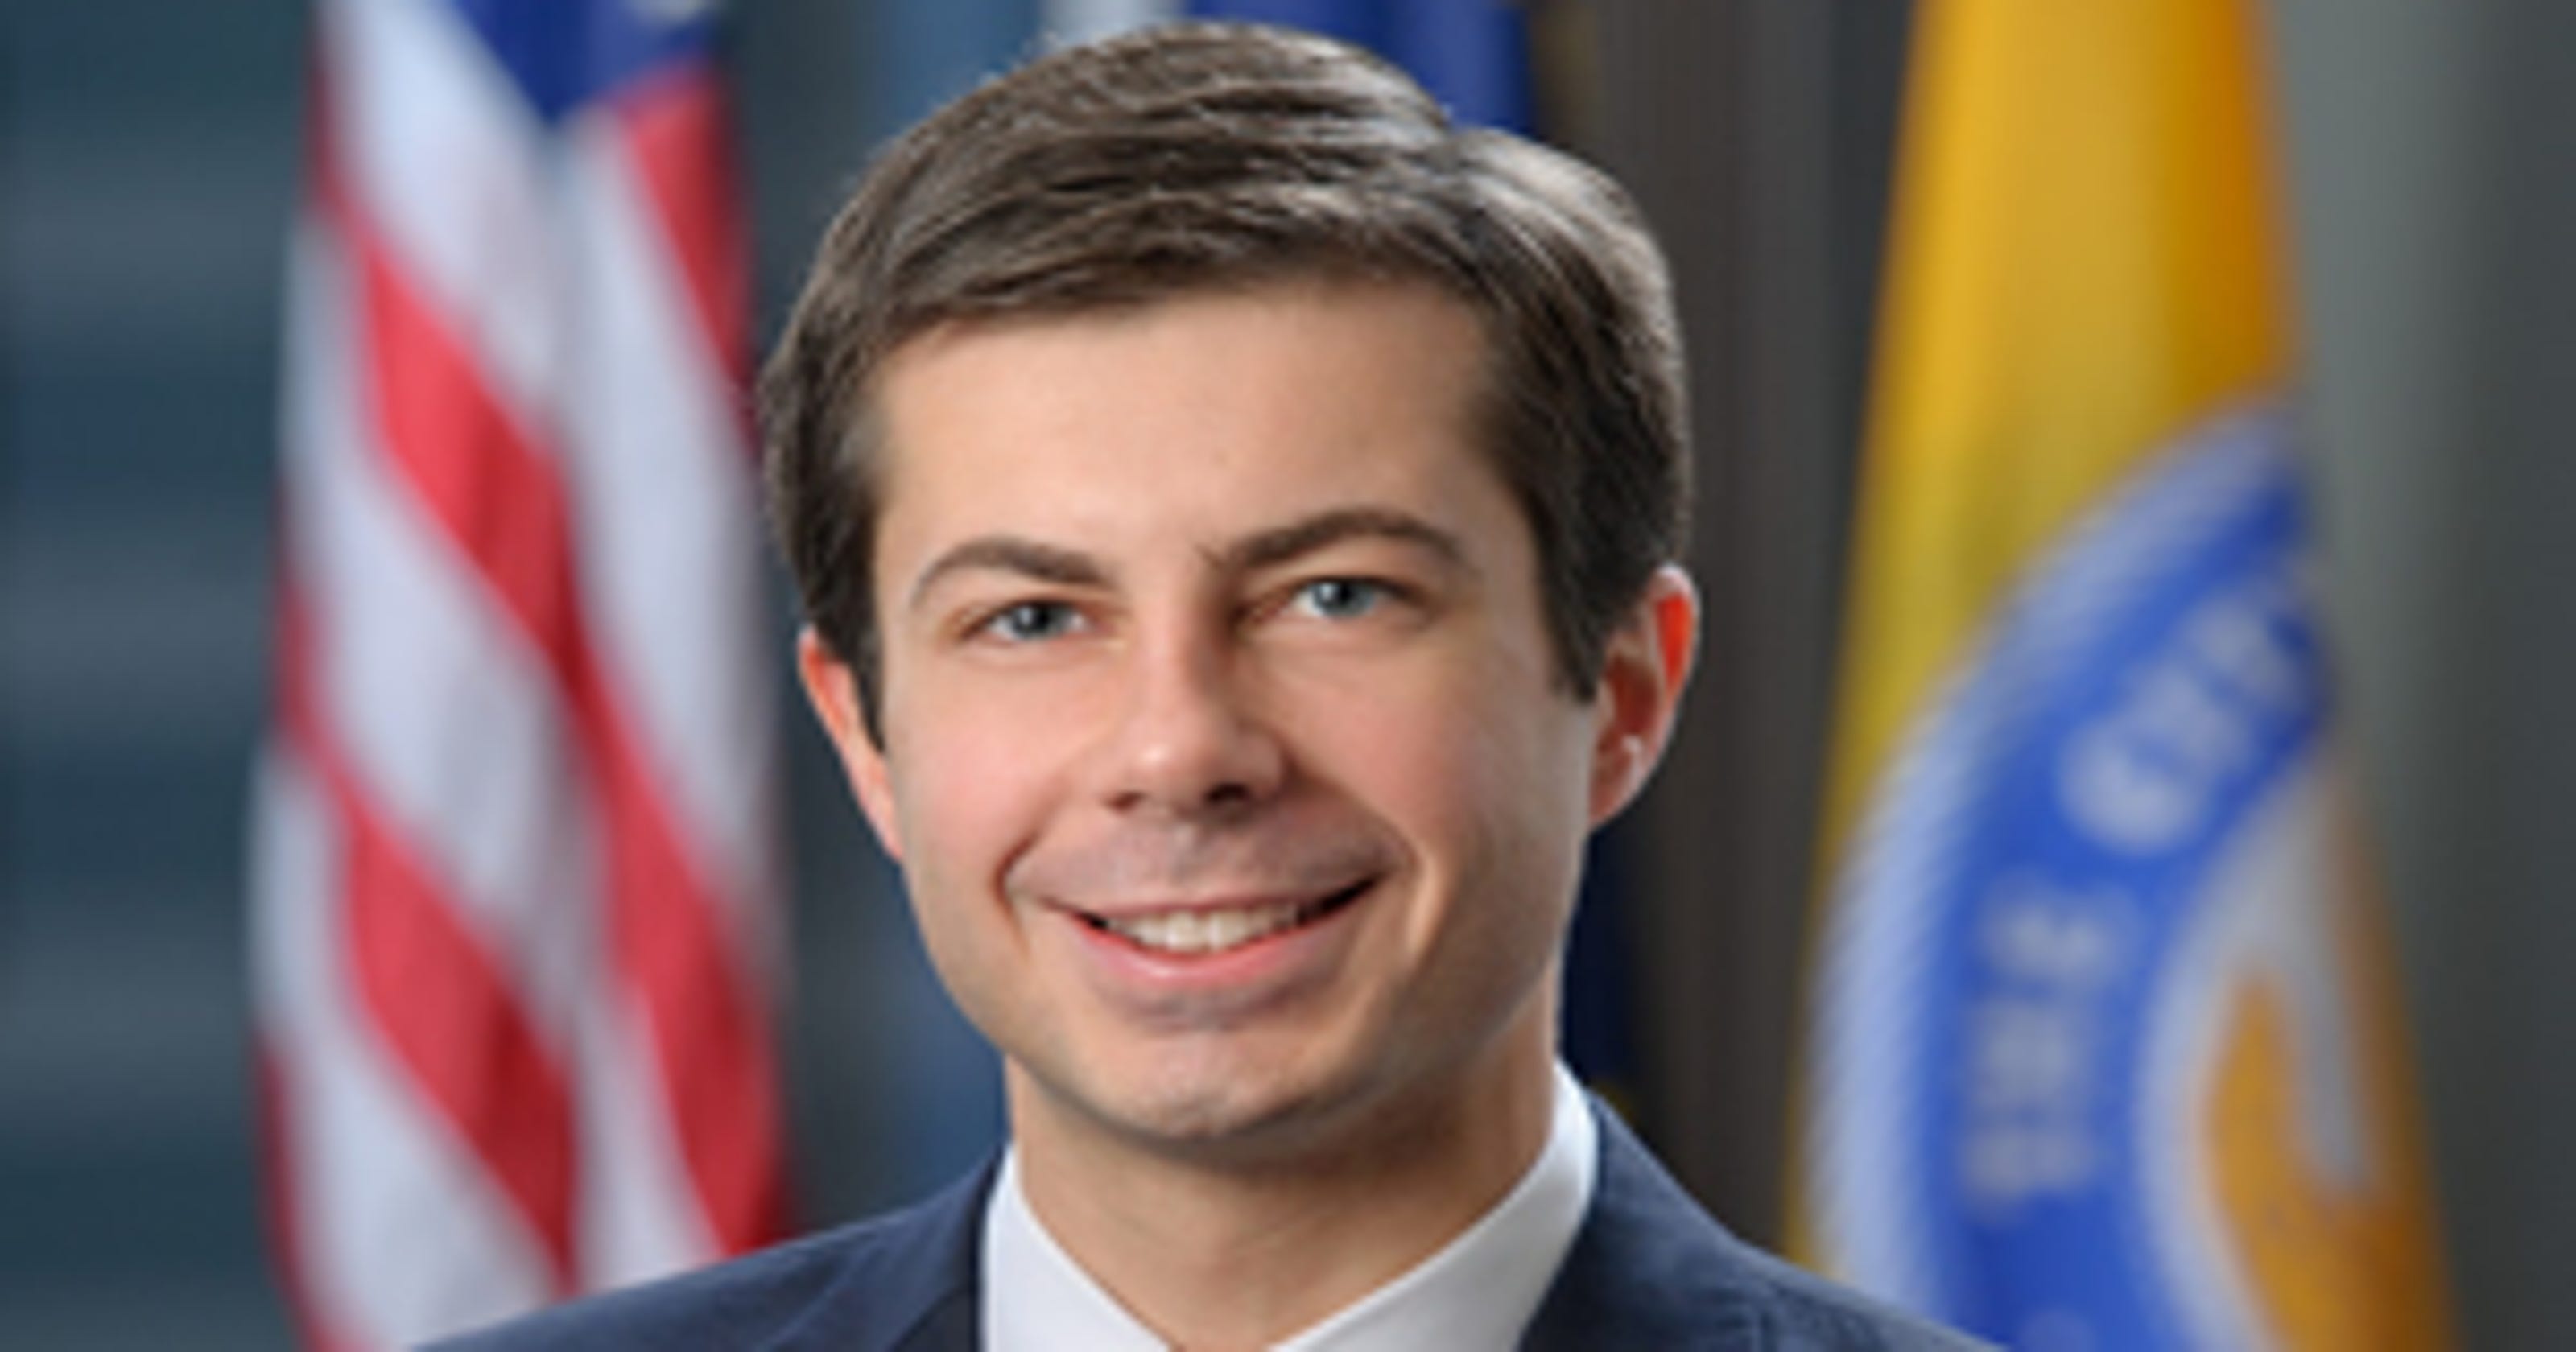 Pete Buttigieg running for president 2020: What we know